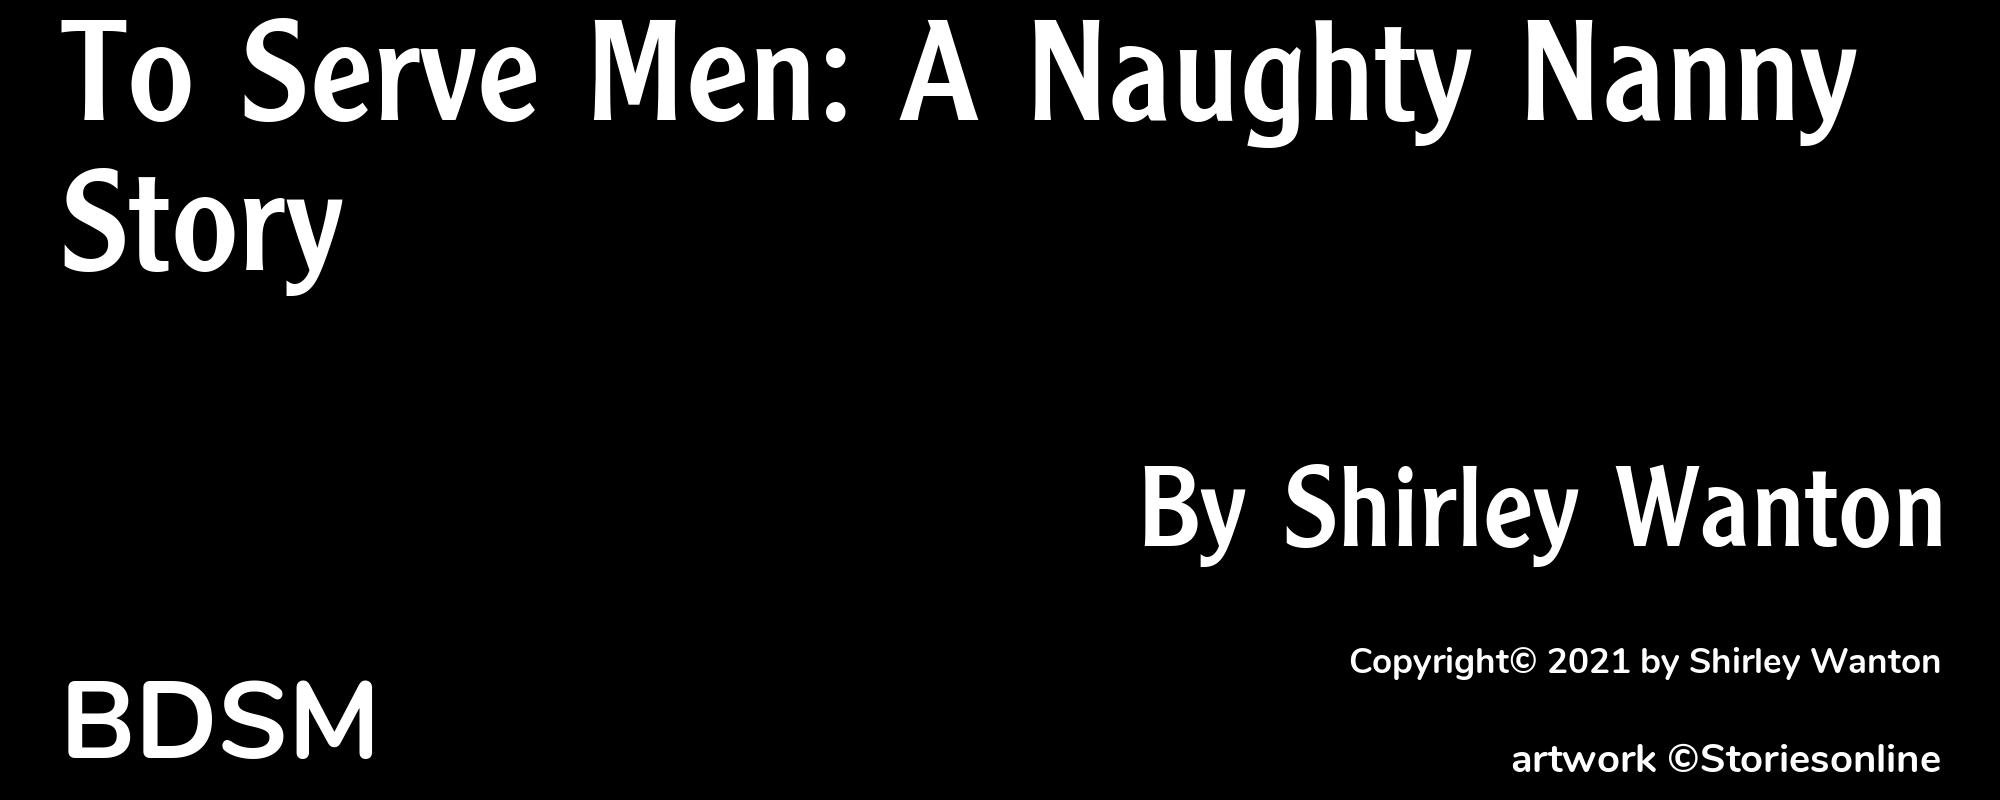 To Serve Men: A Naughty Nanny Story - Cover